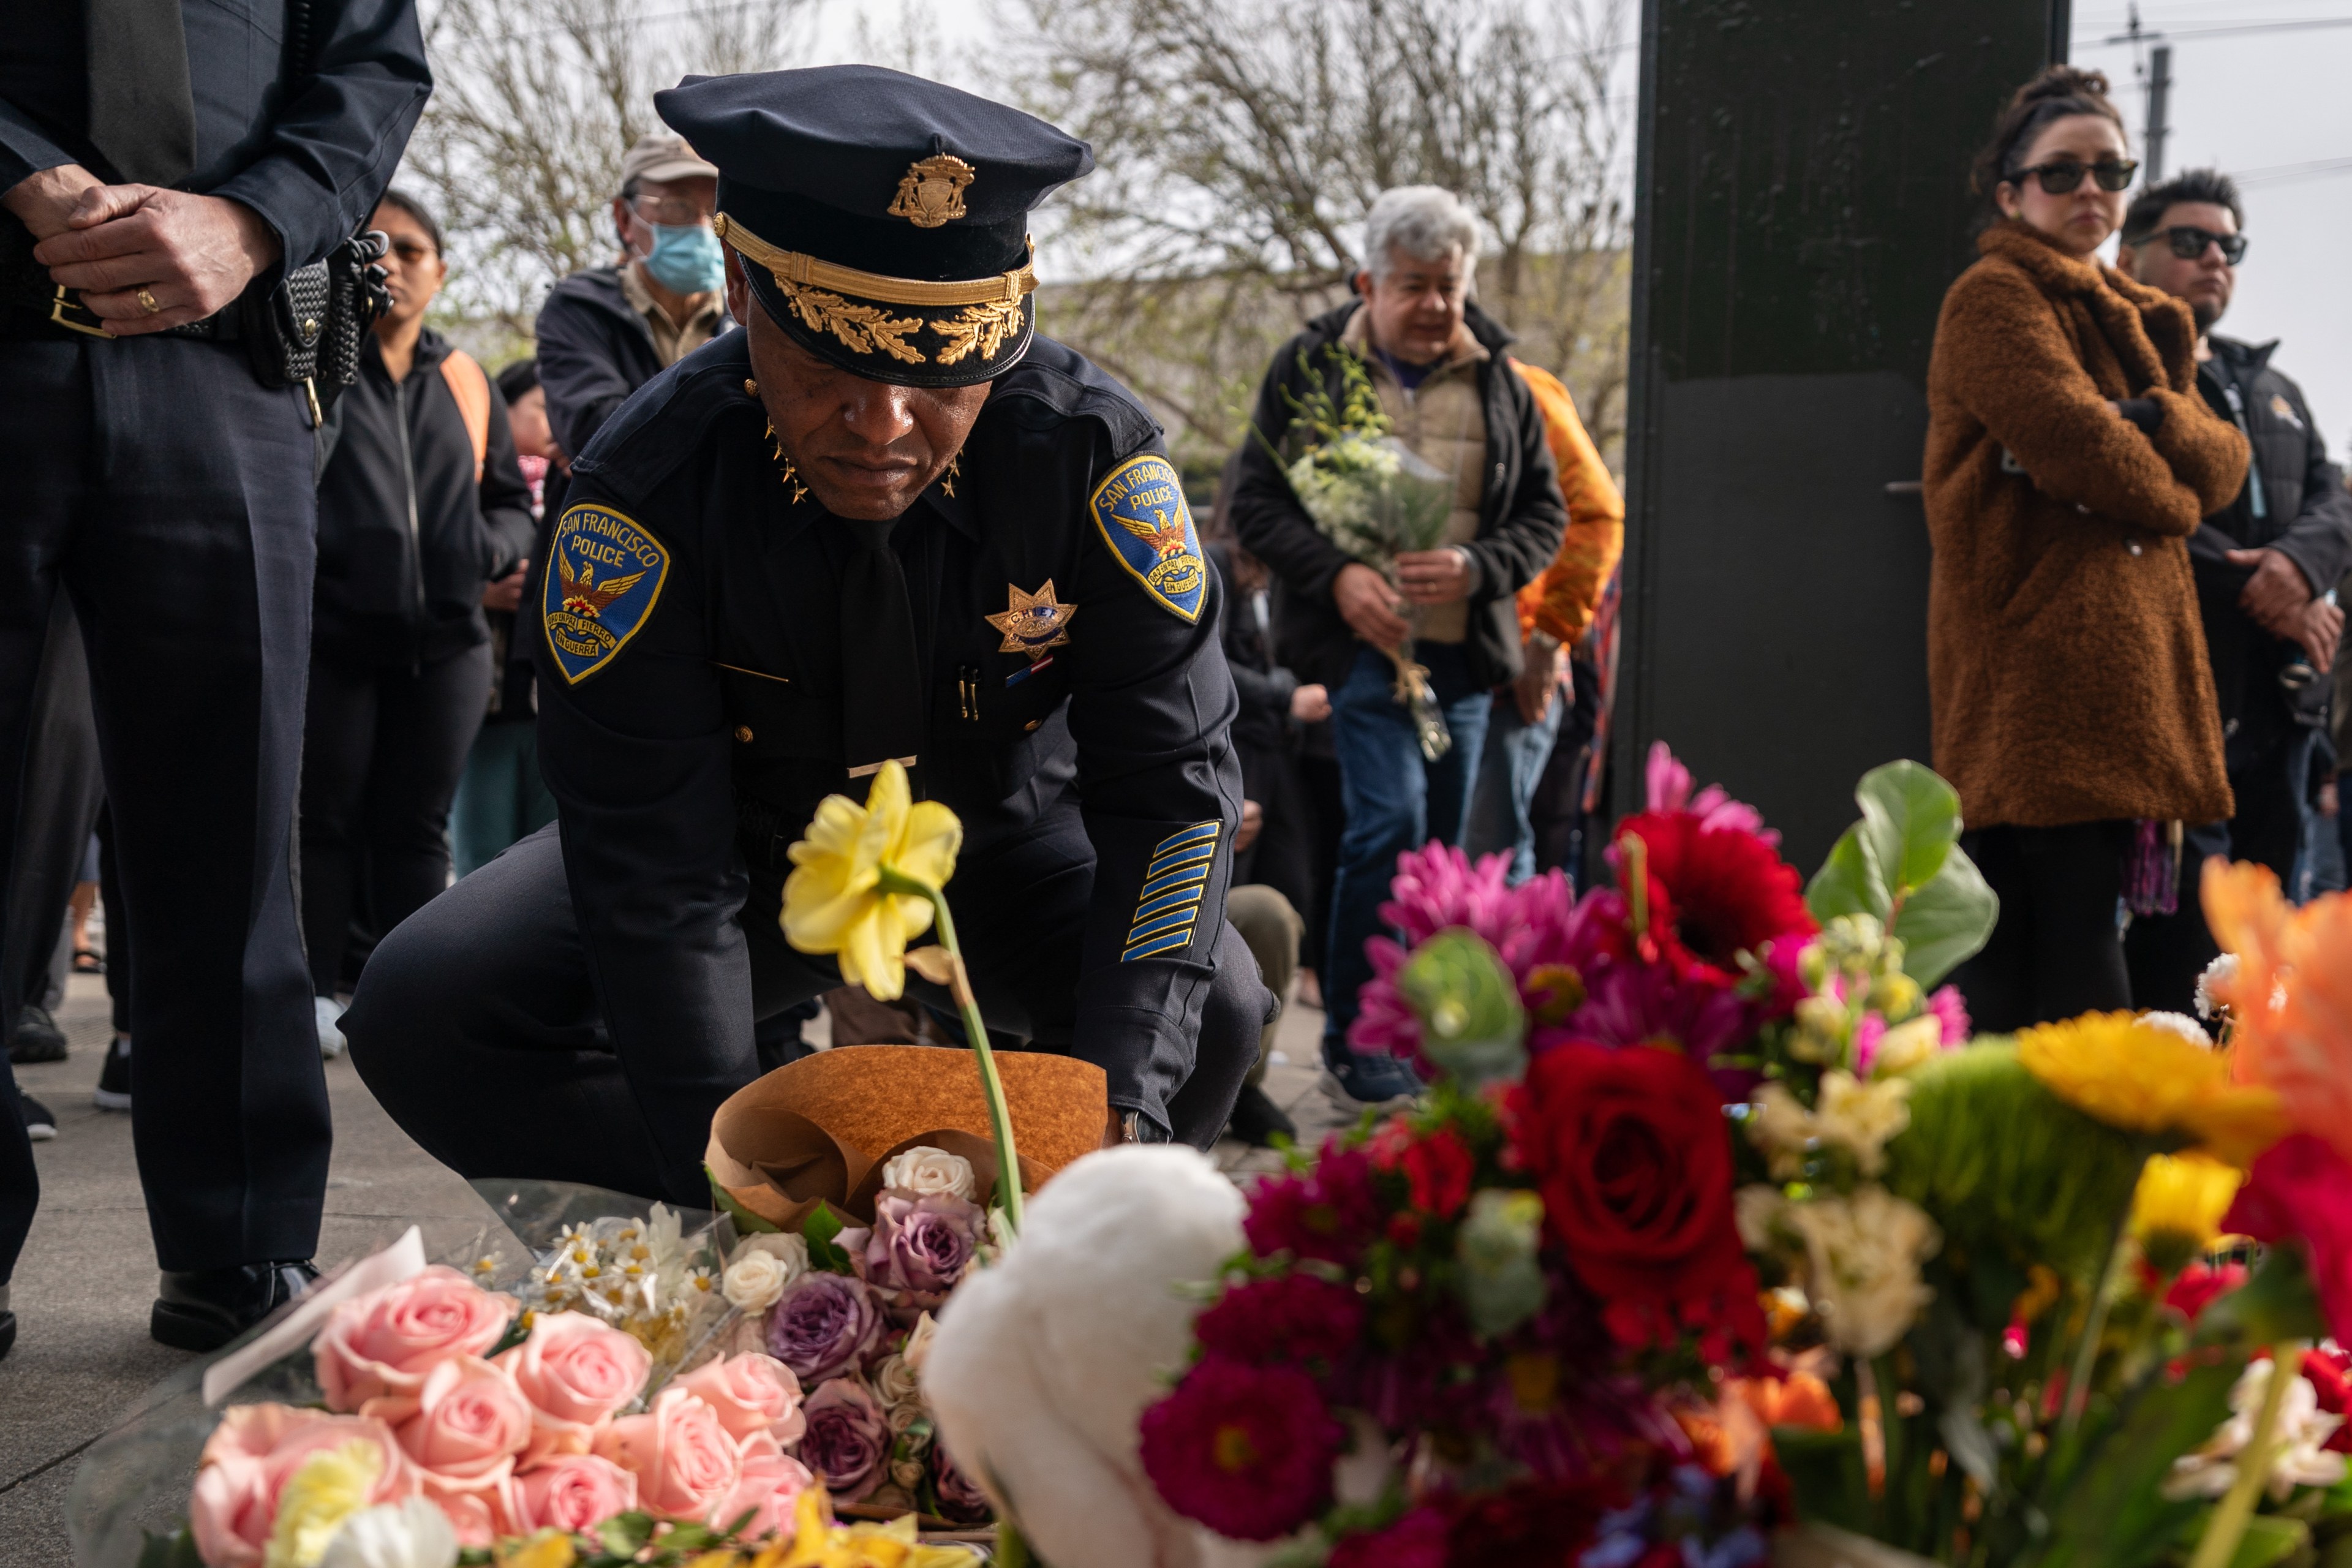 A police chief lays flowers on the ground in front of a crowd.